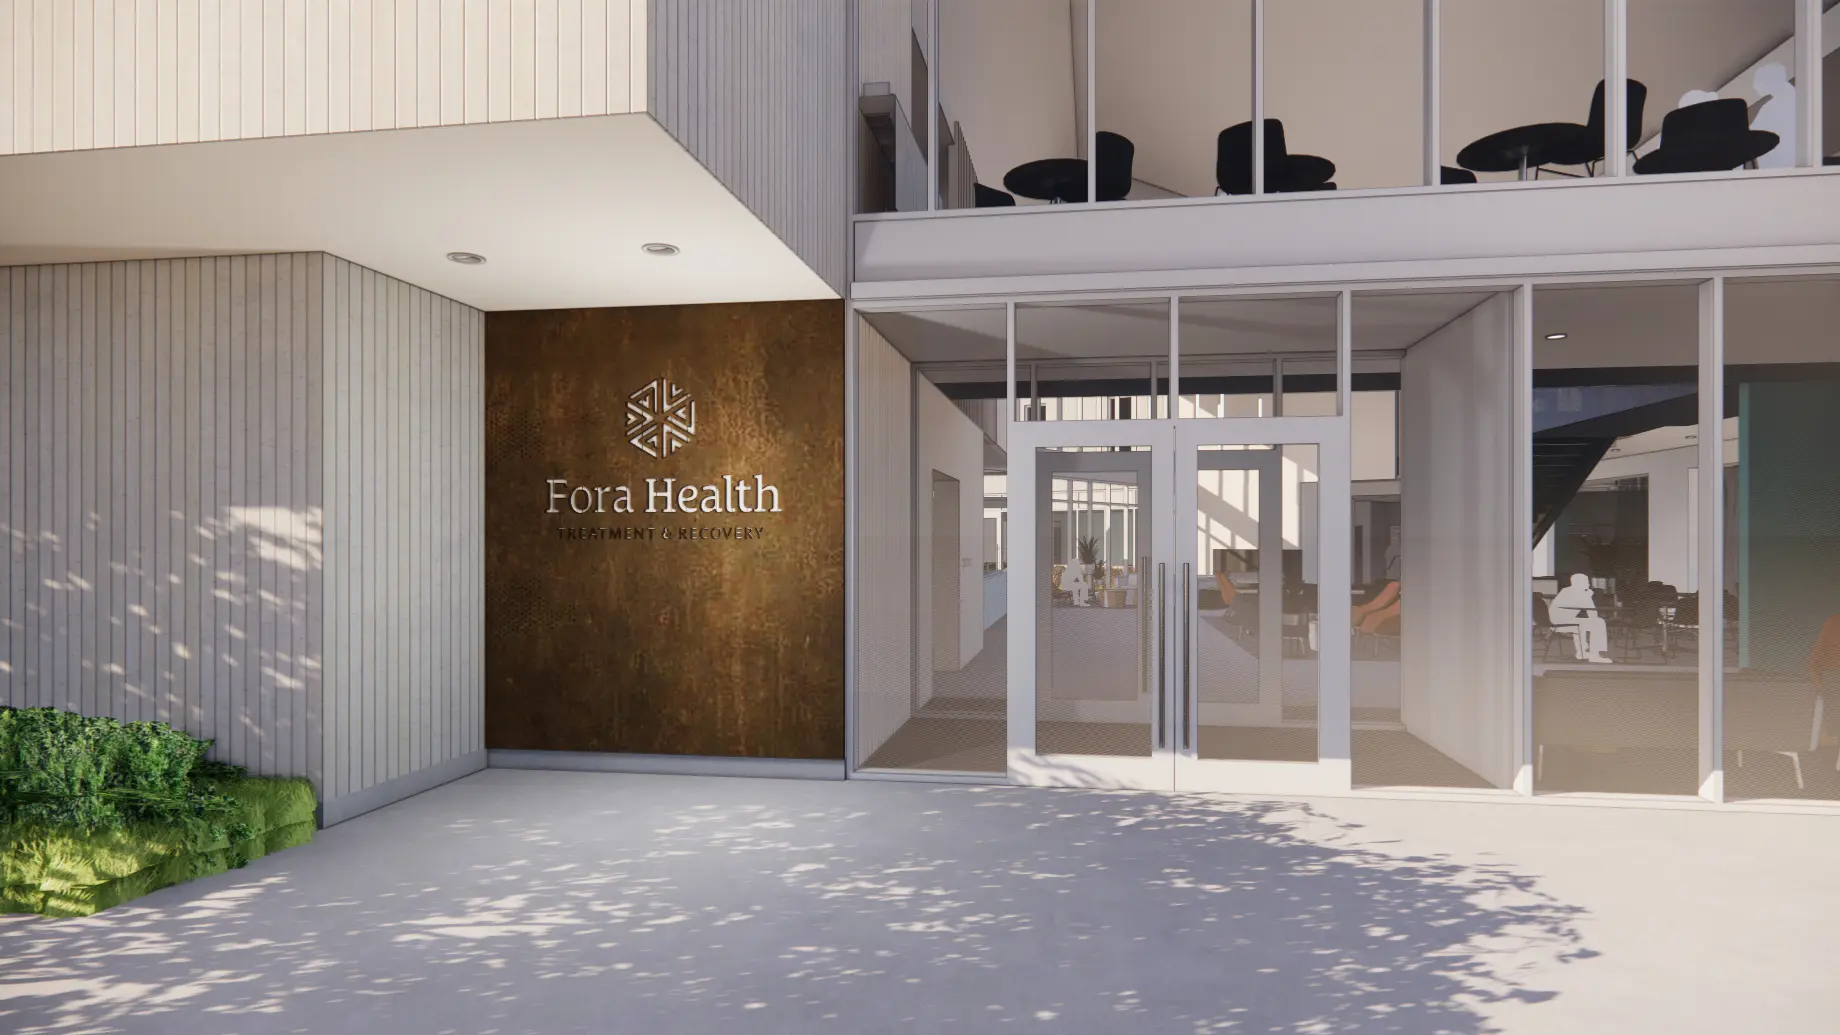 View of entrance to Fora Health. Glass doors and rusted metal wall with logo